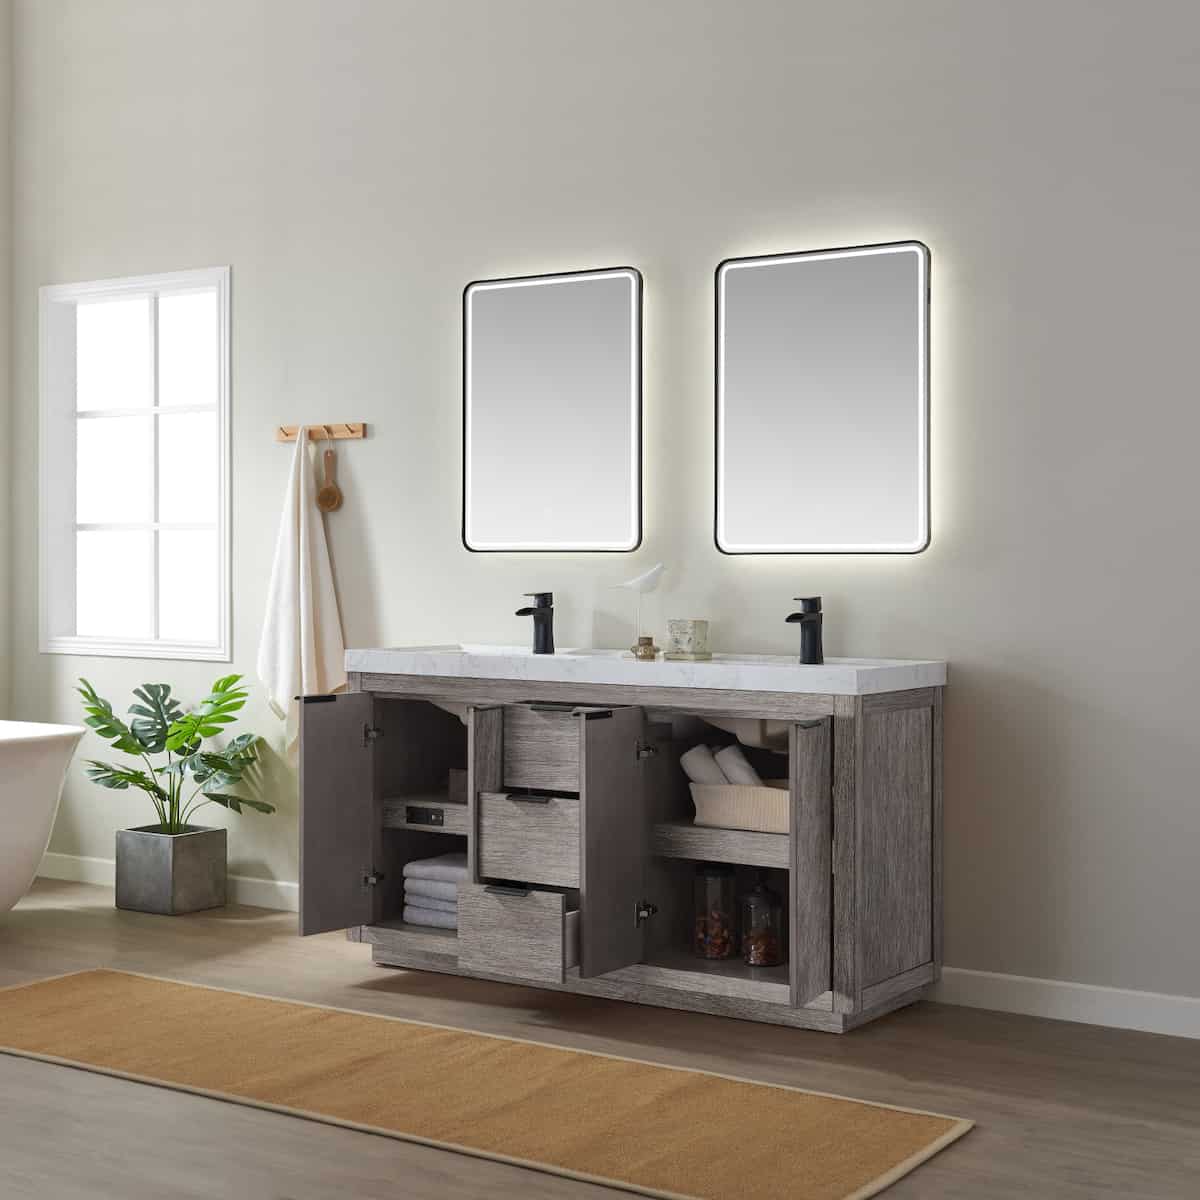 Vinnova Leiza 60 Inch Freestanding Double Vanity in Classical Grey with White Composite Grain Countertop With Mirror Inside 701560-CR-GW